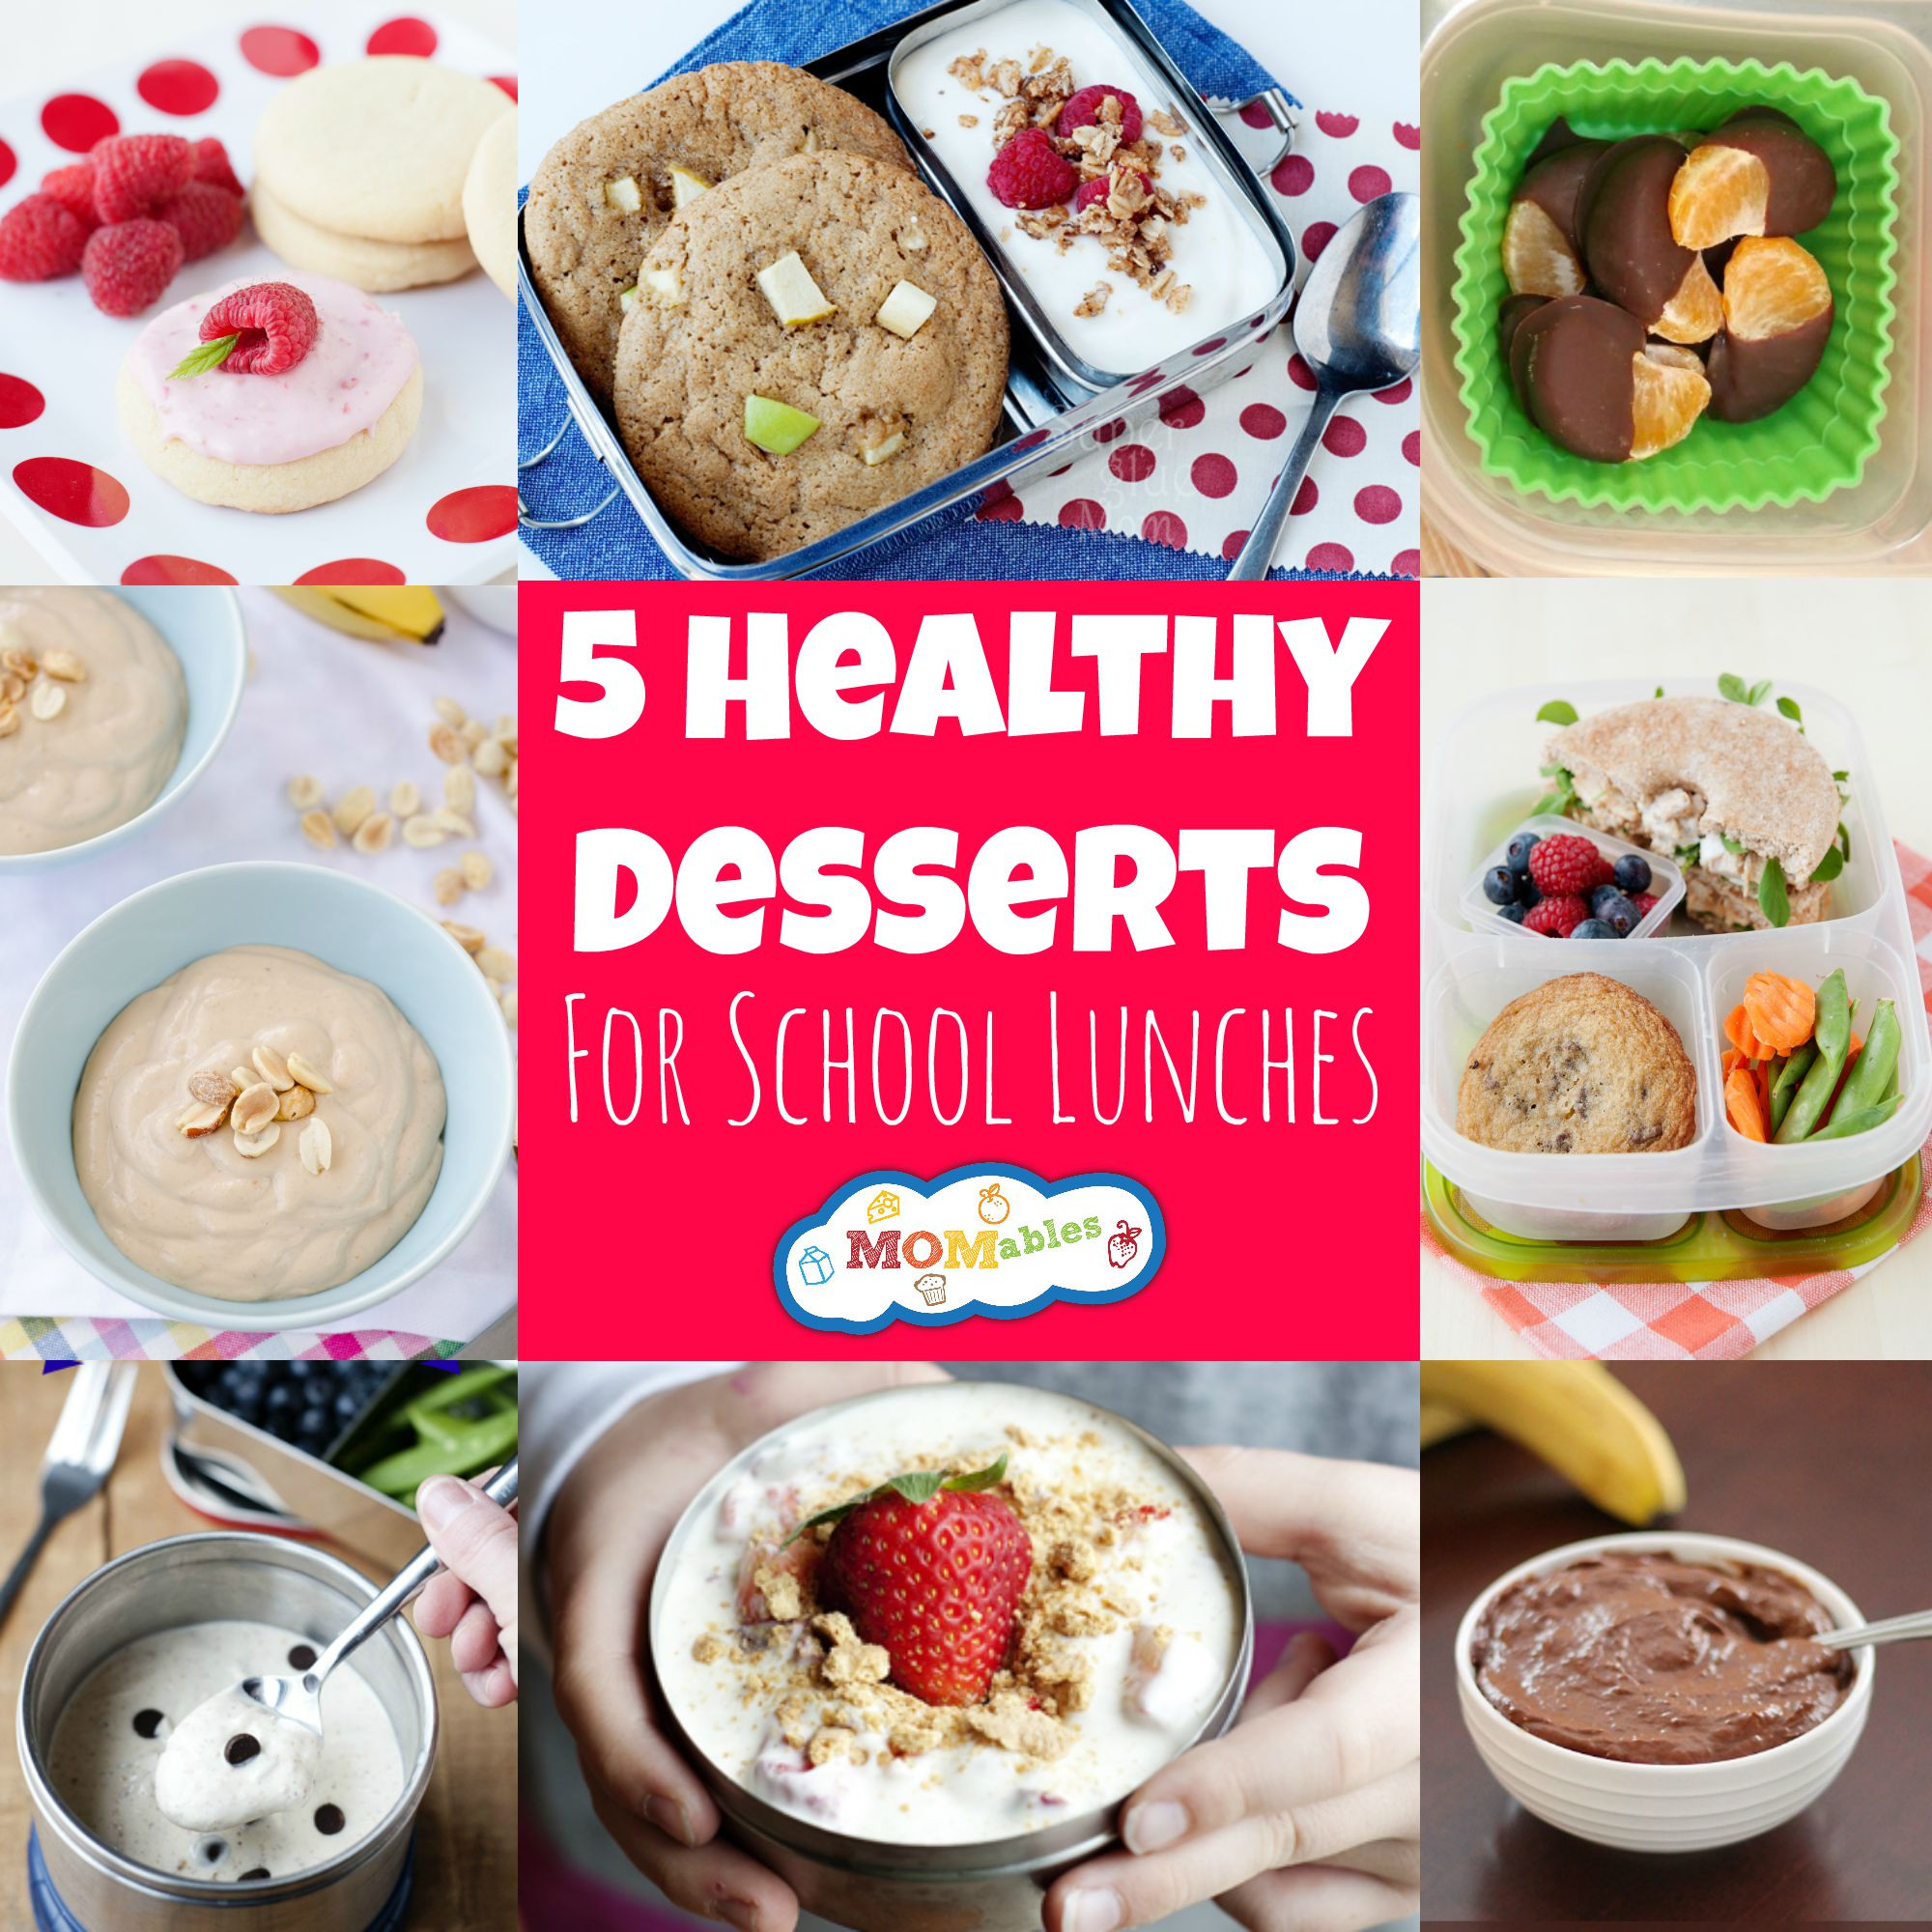 Fun Healthy Desserts
 5 Healthy Desserts for School Lunches MOMables